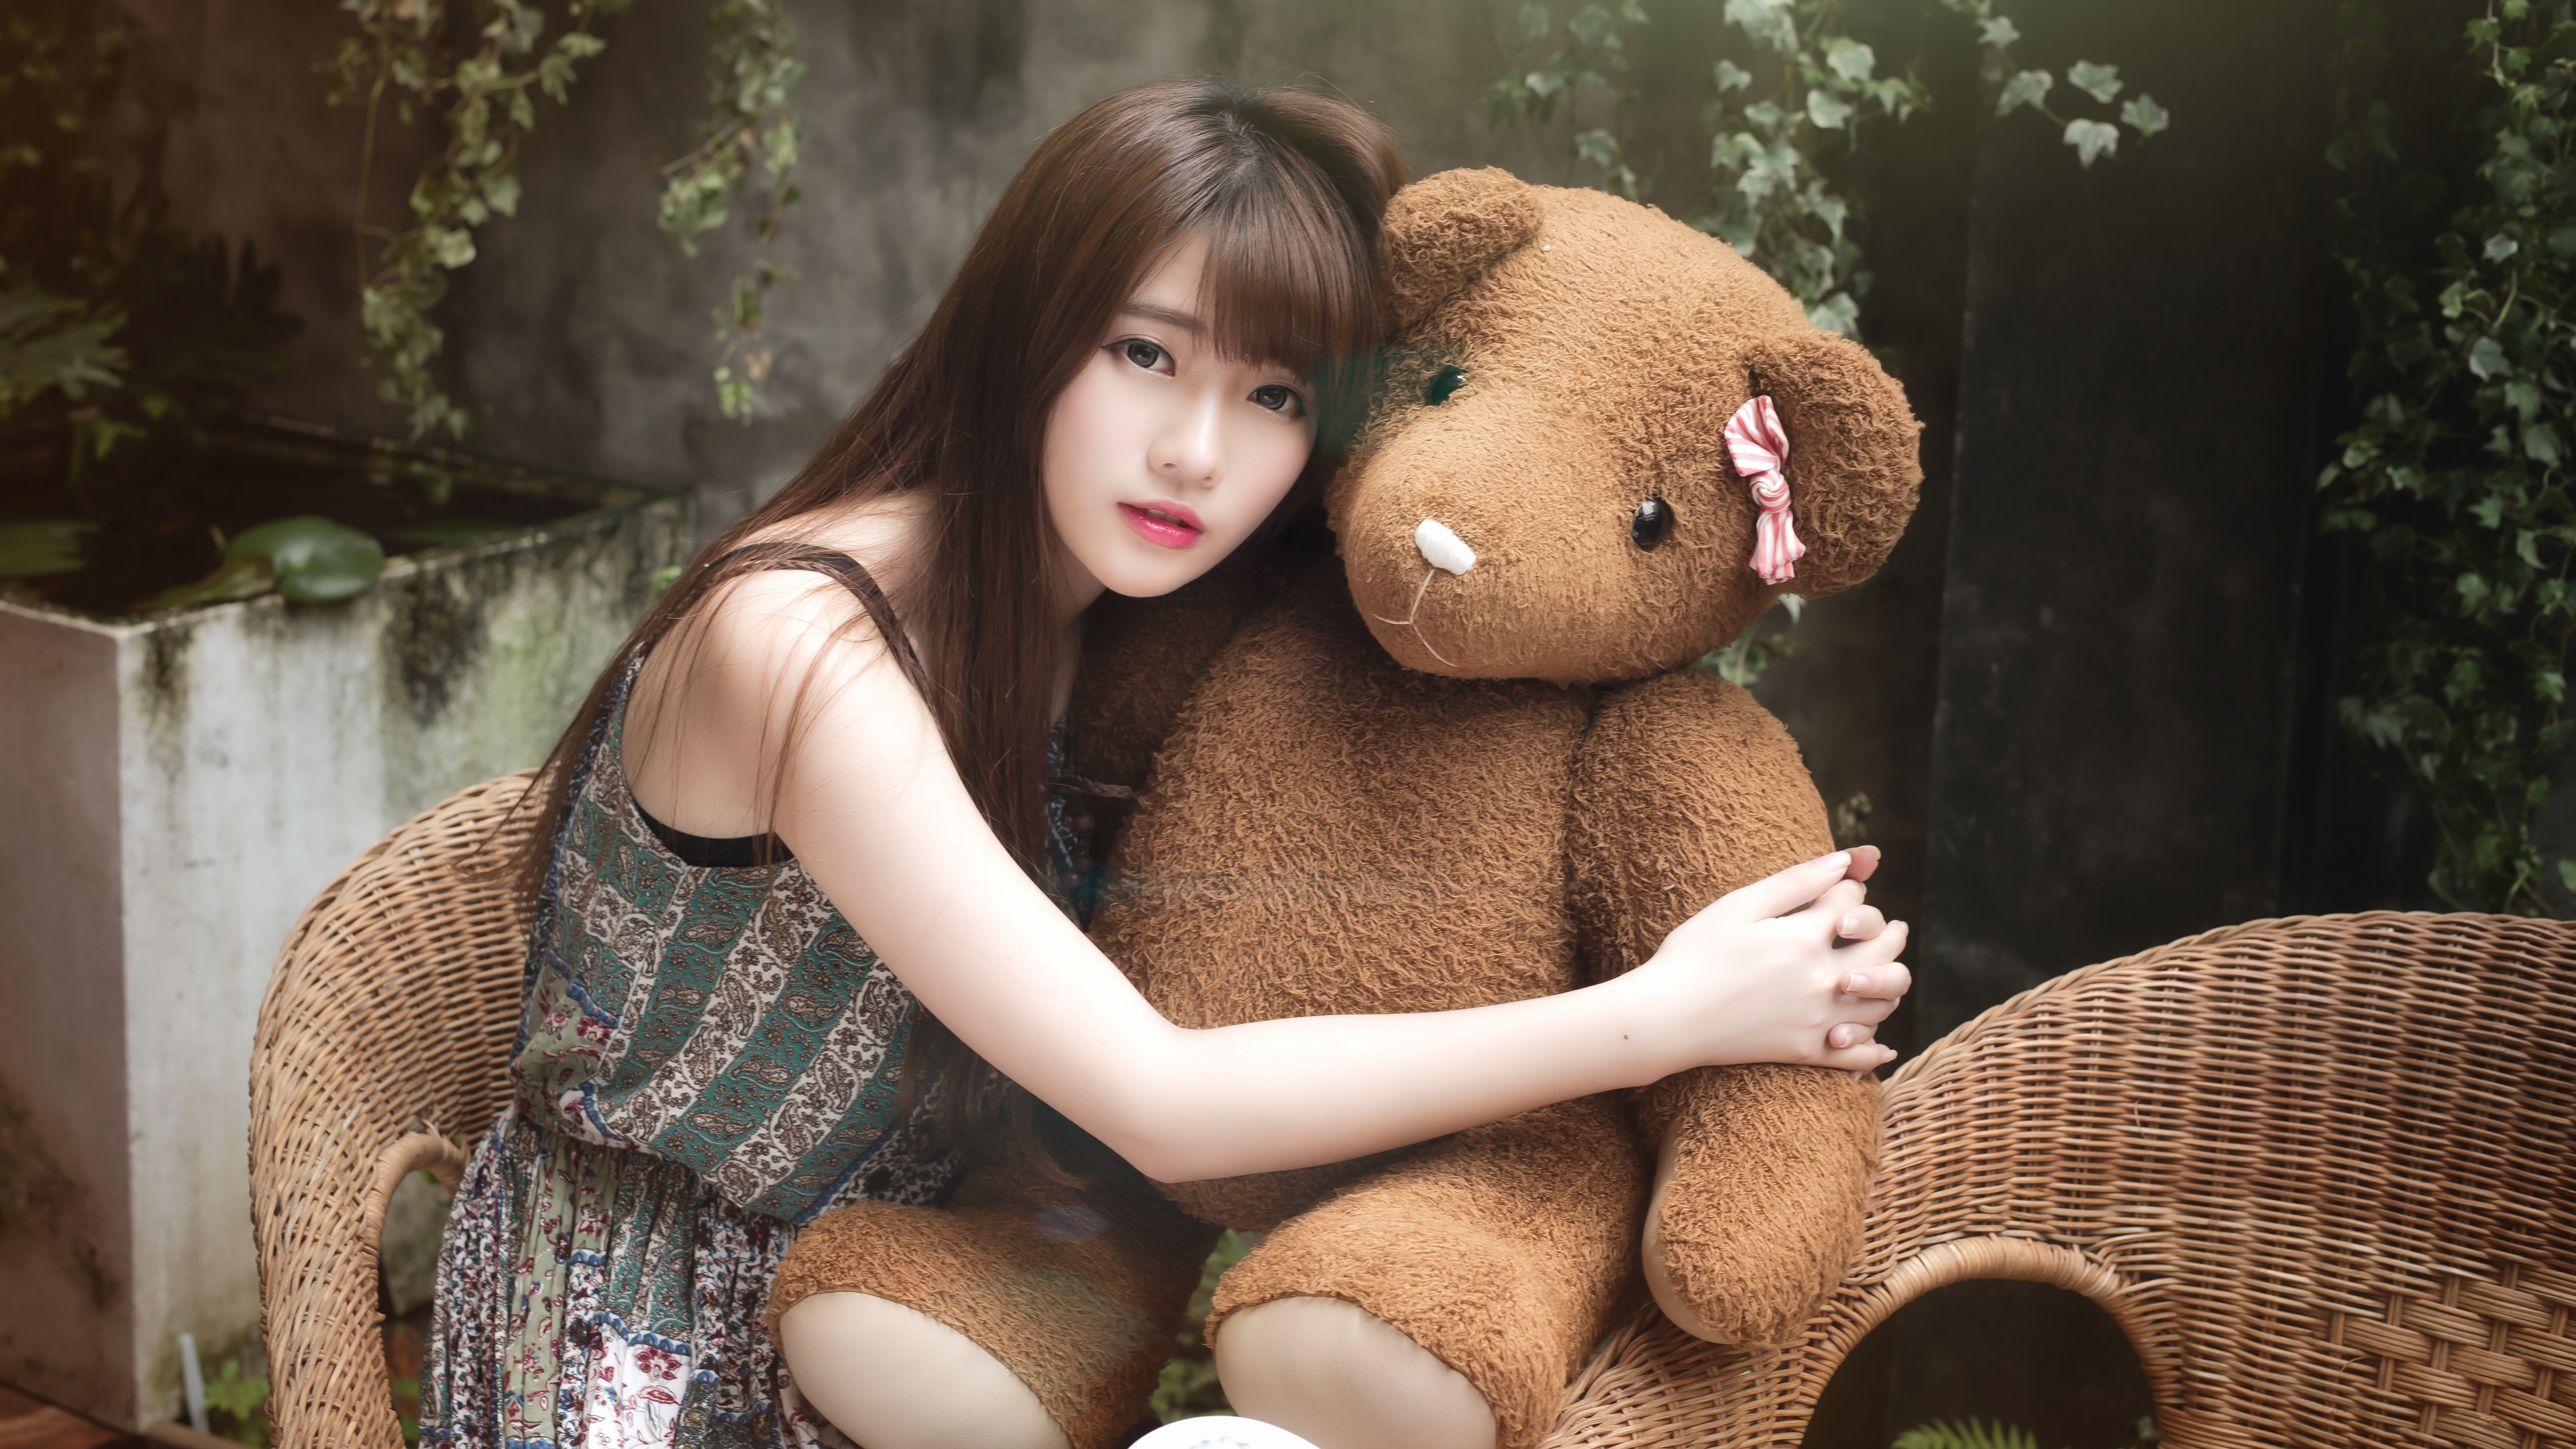 People 3840x2160 model Asian stuffed animal looking at viewer women blurry background